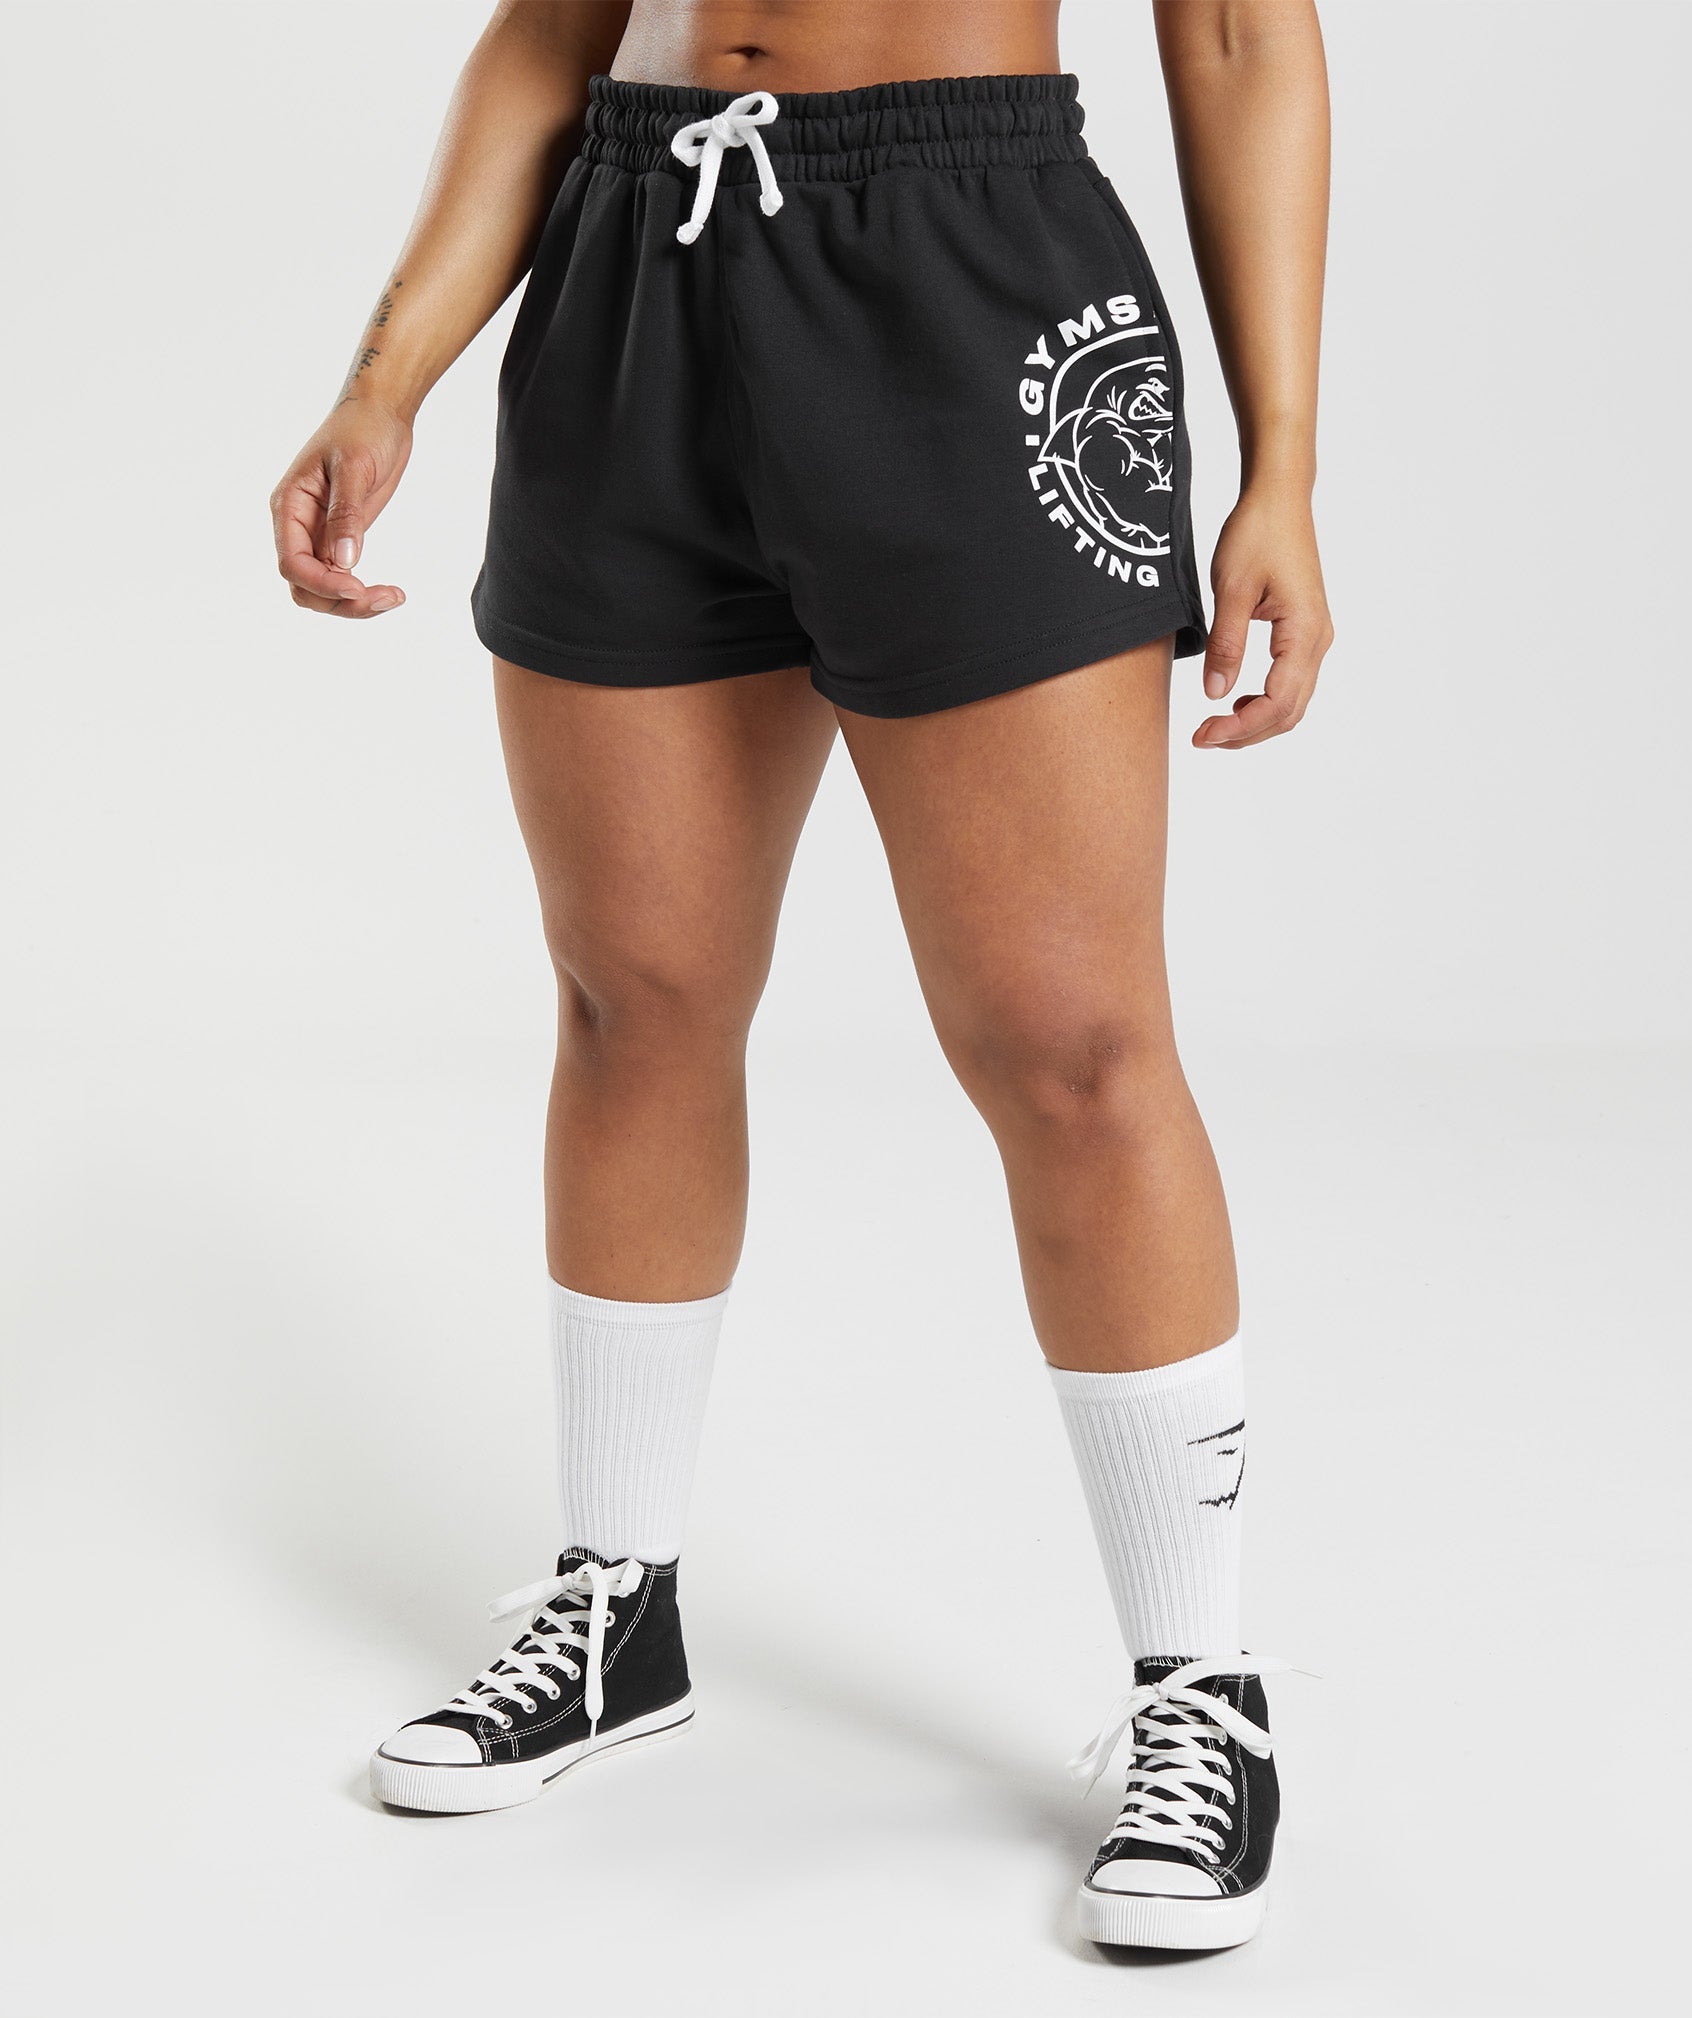 Legacy Shorts in Black - view 1